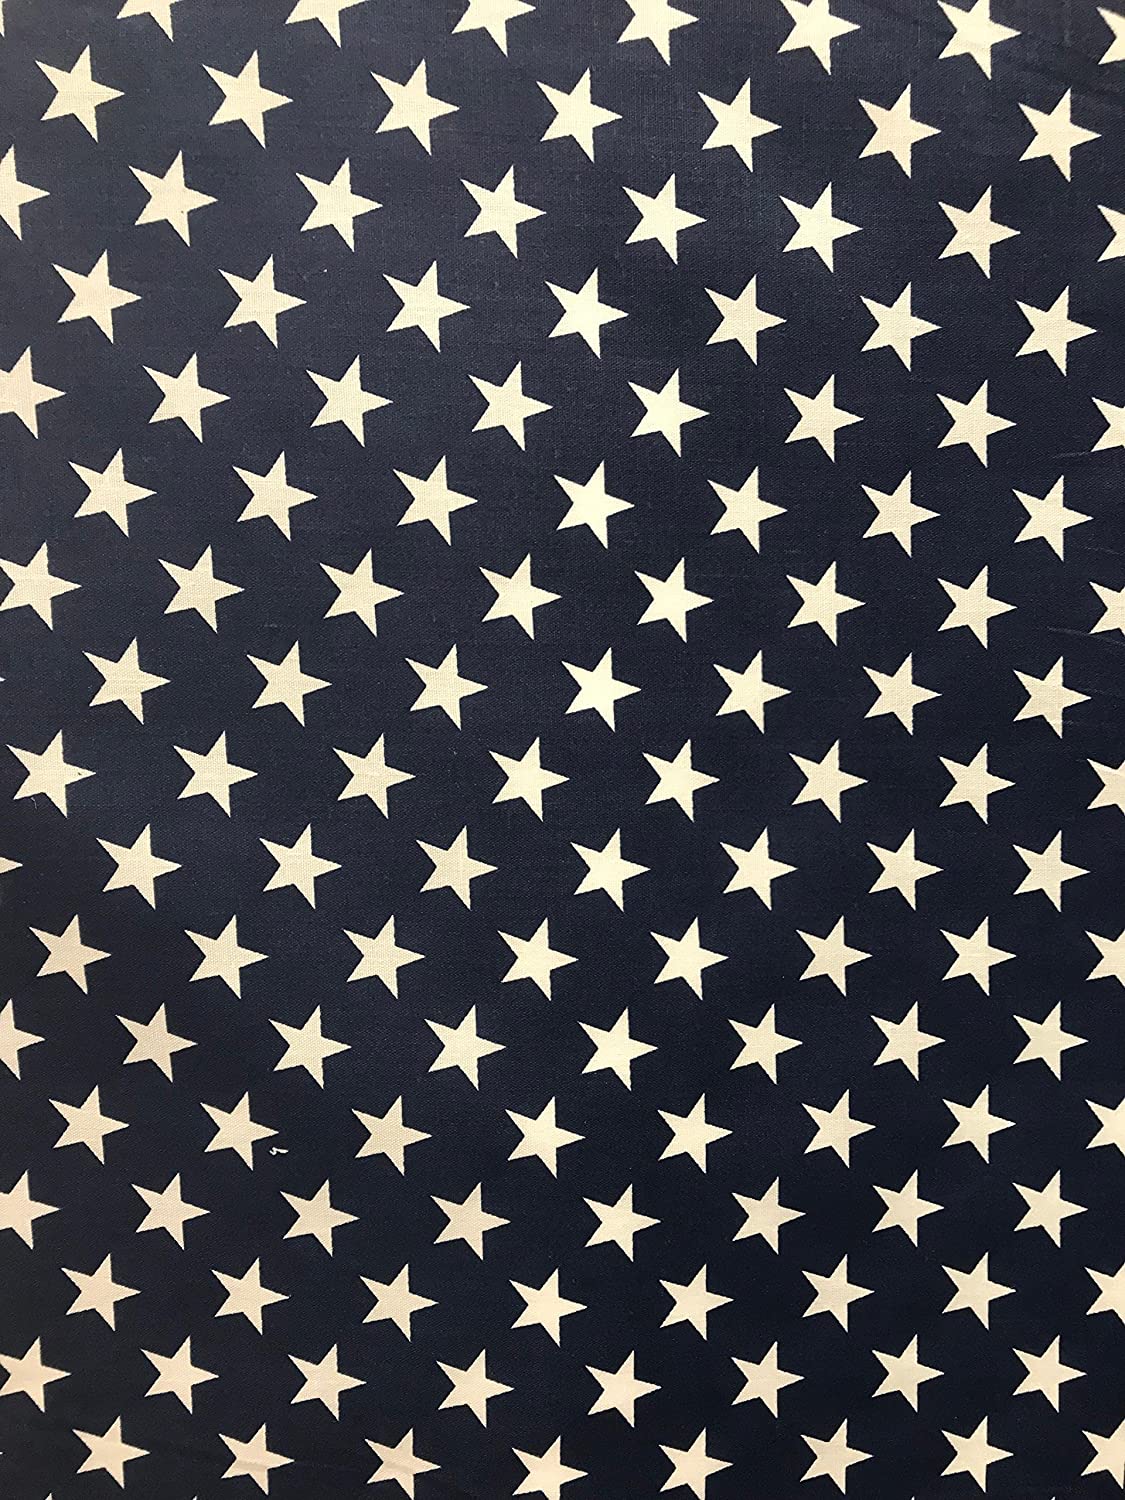 Stars Print Poly Cotton Fabric by The Yard (Navy)